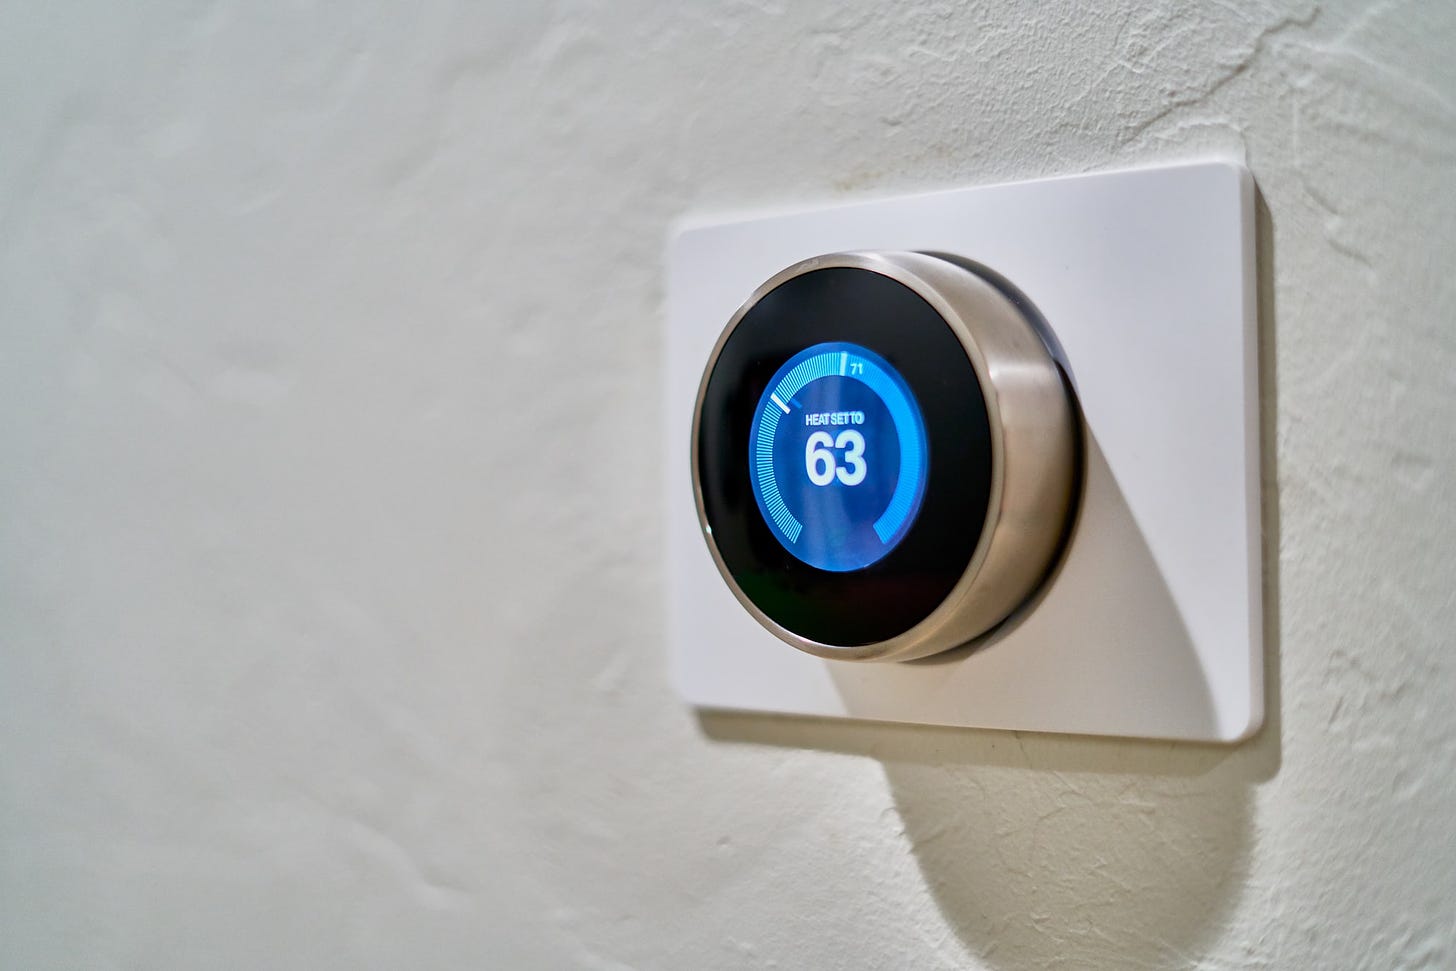 Expert says IoT and smart home devices are 